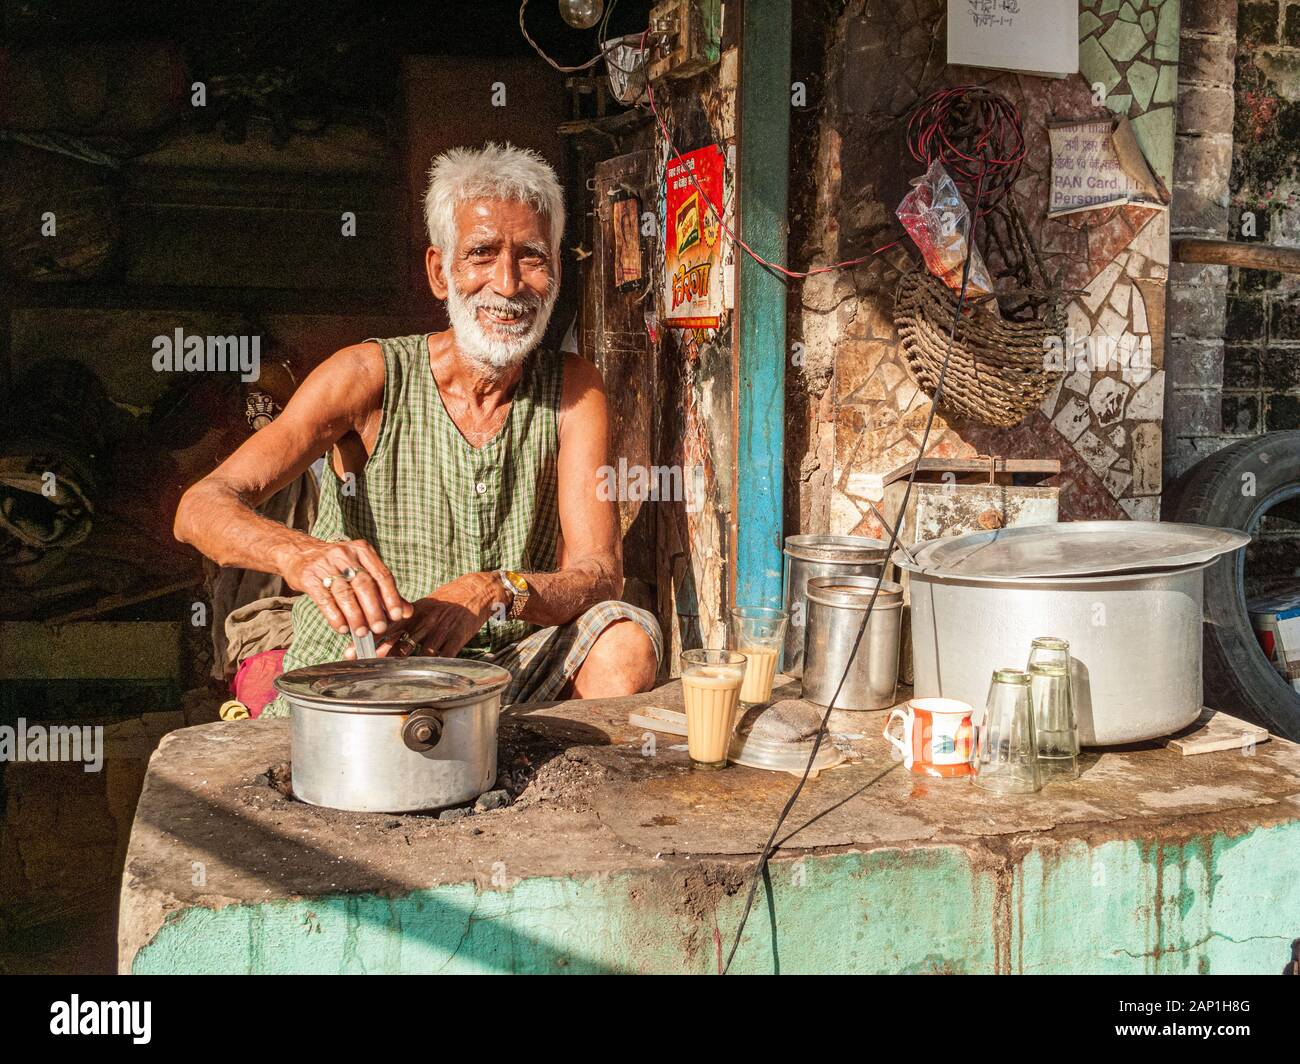 A vendor is selling delicious tea in the street bazaar Stock Photo